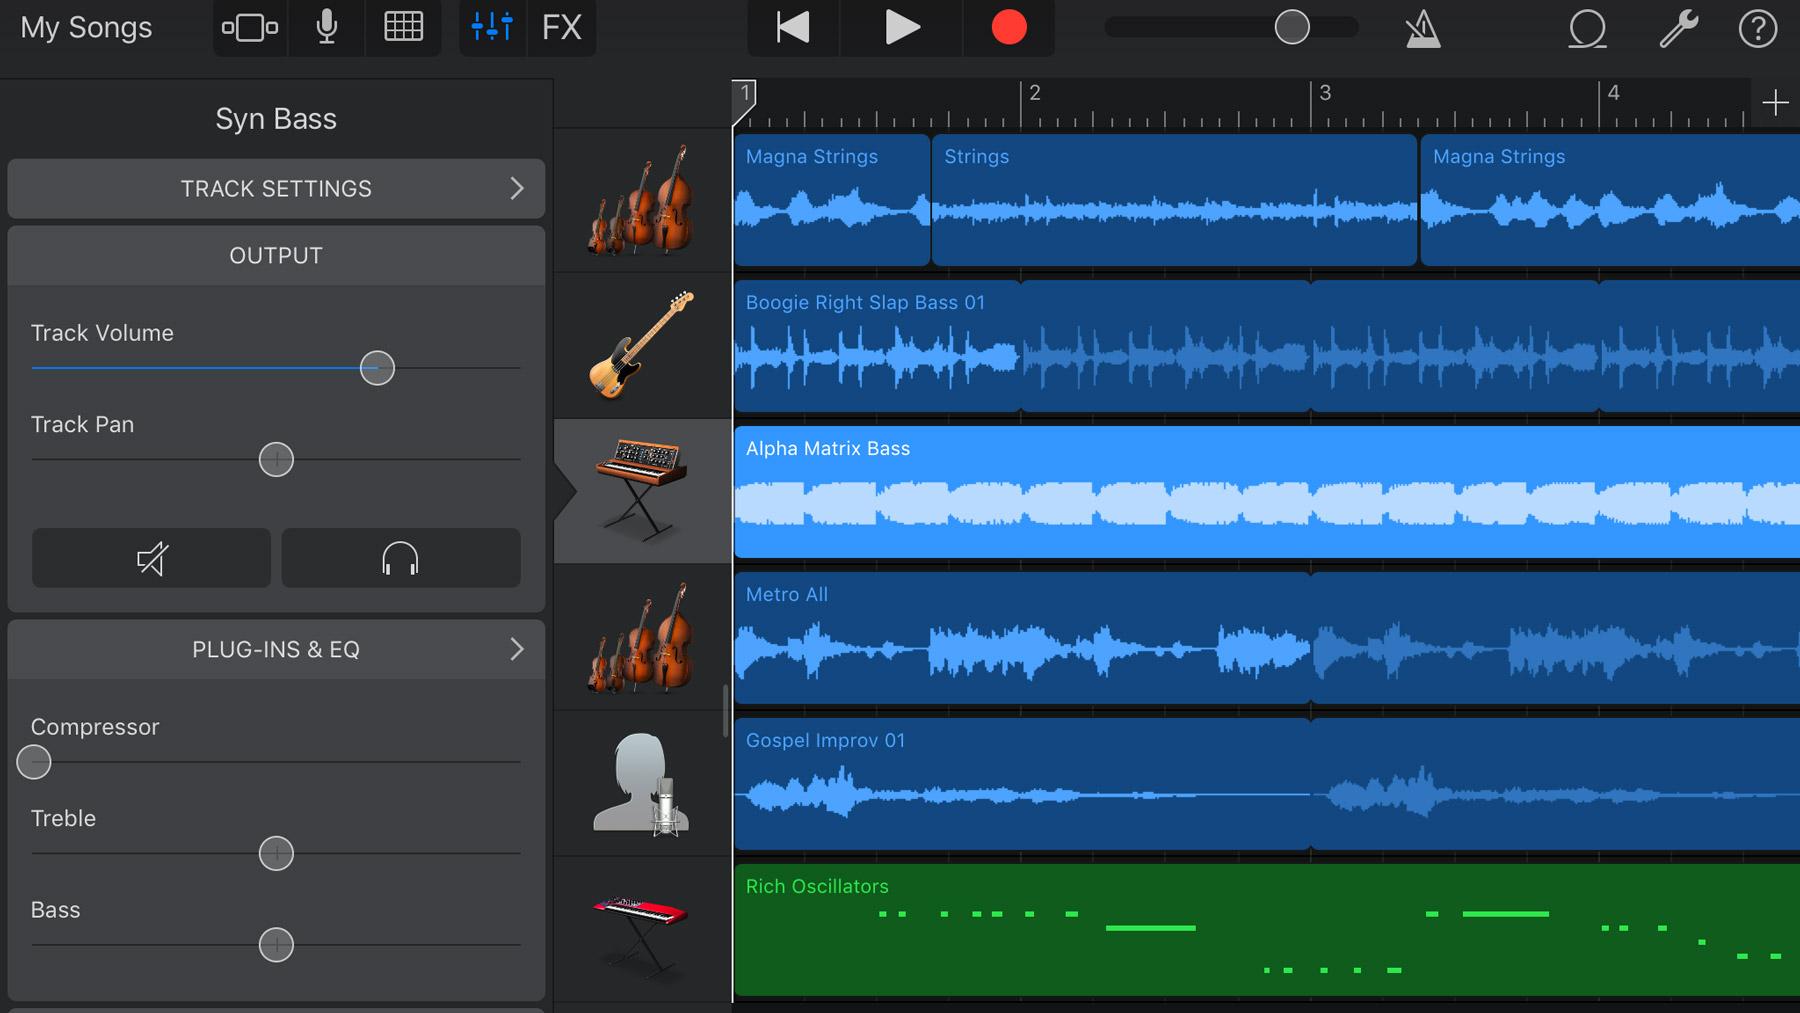 How To Add Songs To Garageband On Ipad - cleverpilot